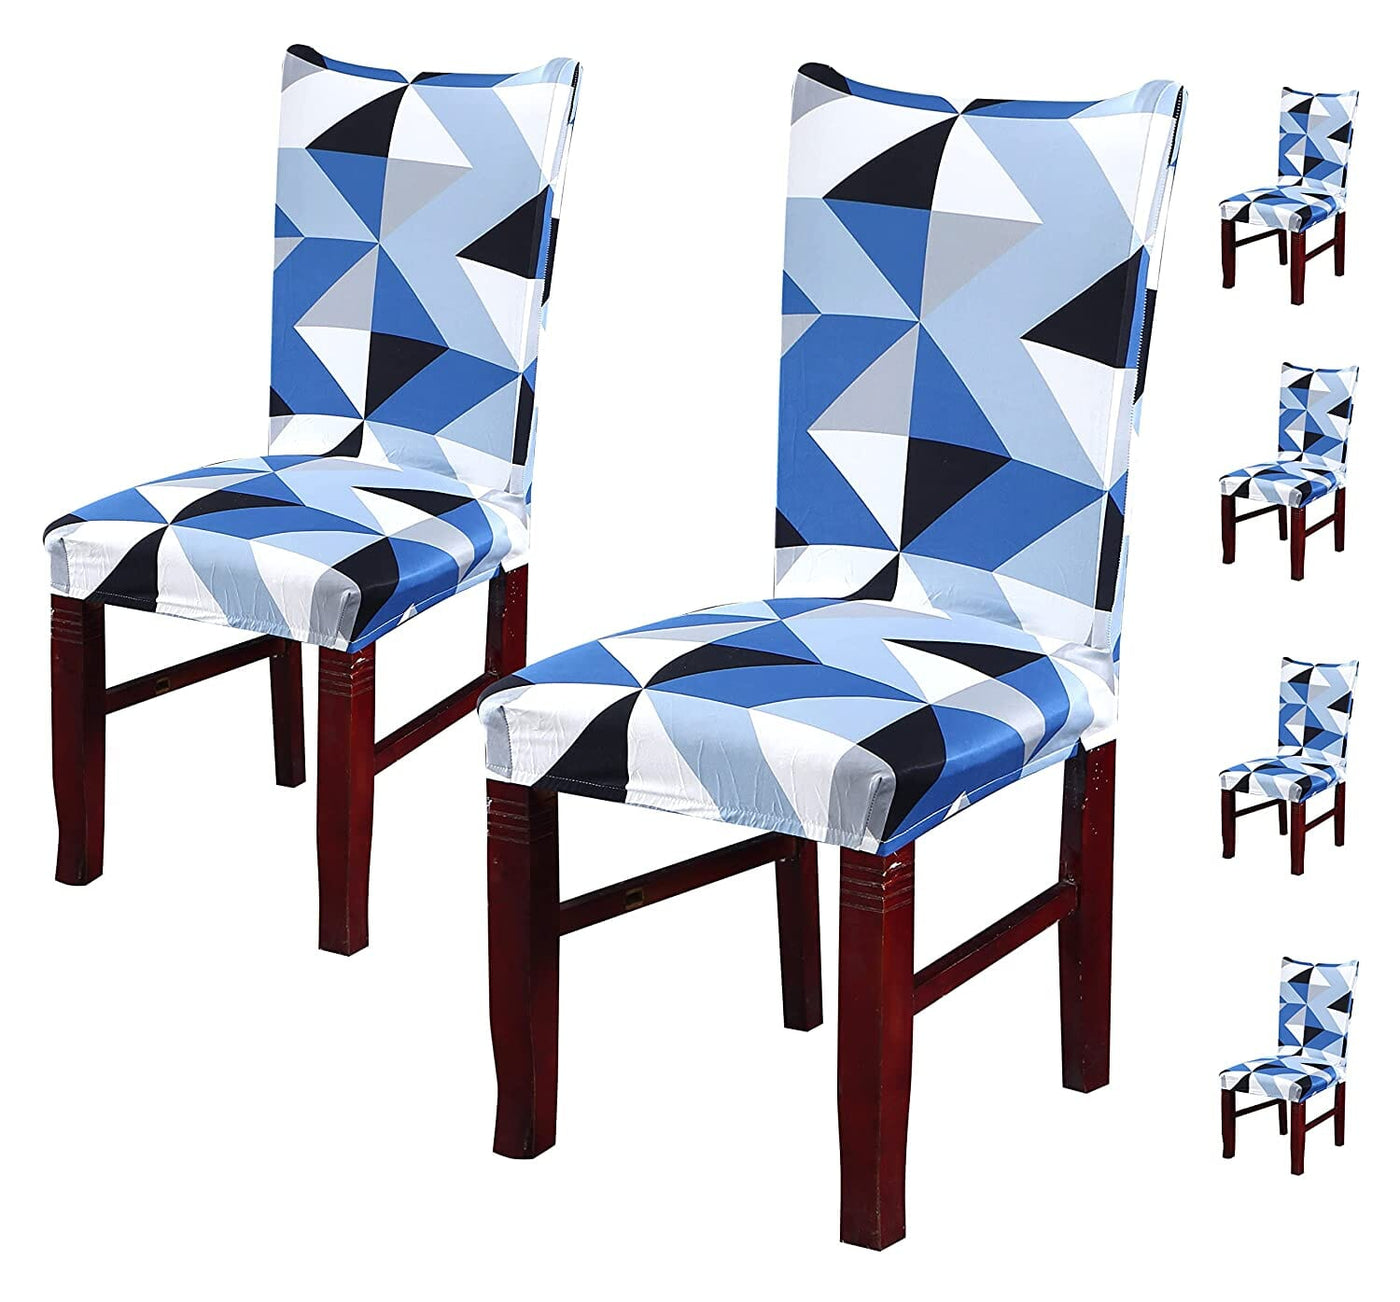 Blue Obtuse Triangle Premium Chair Cover - Stretchable & Elastic Fitted Great Happy IN 